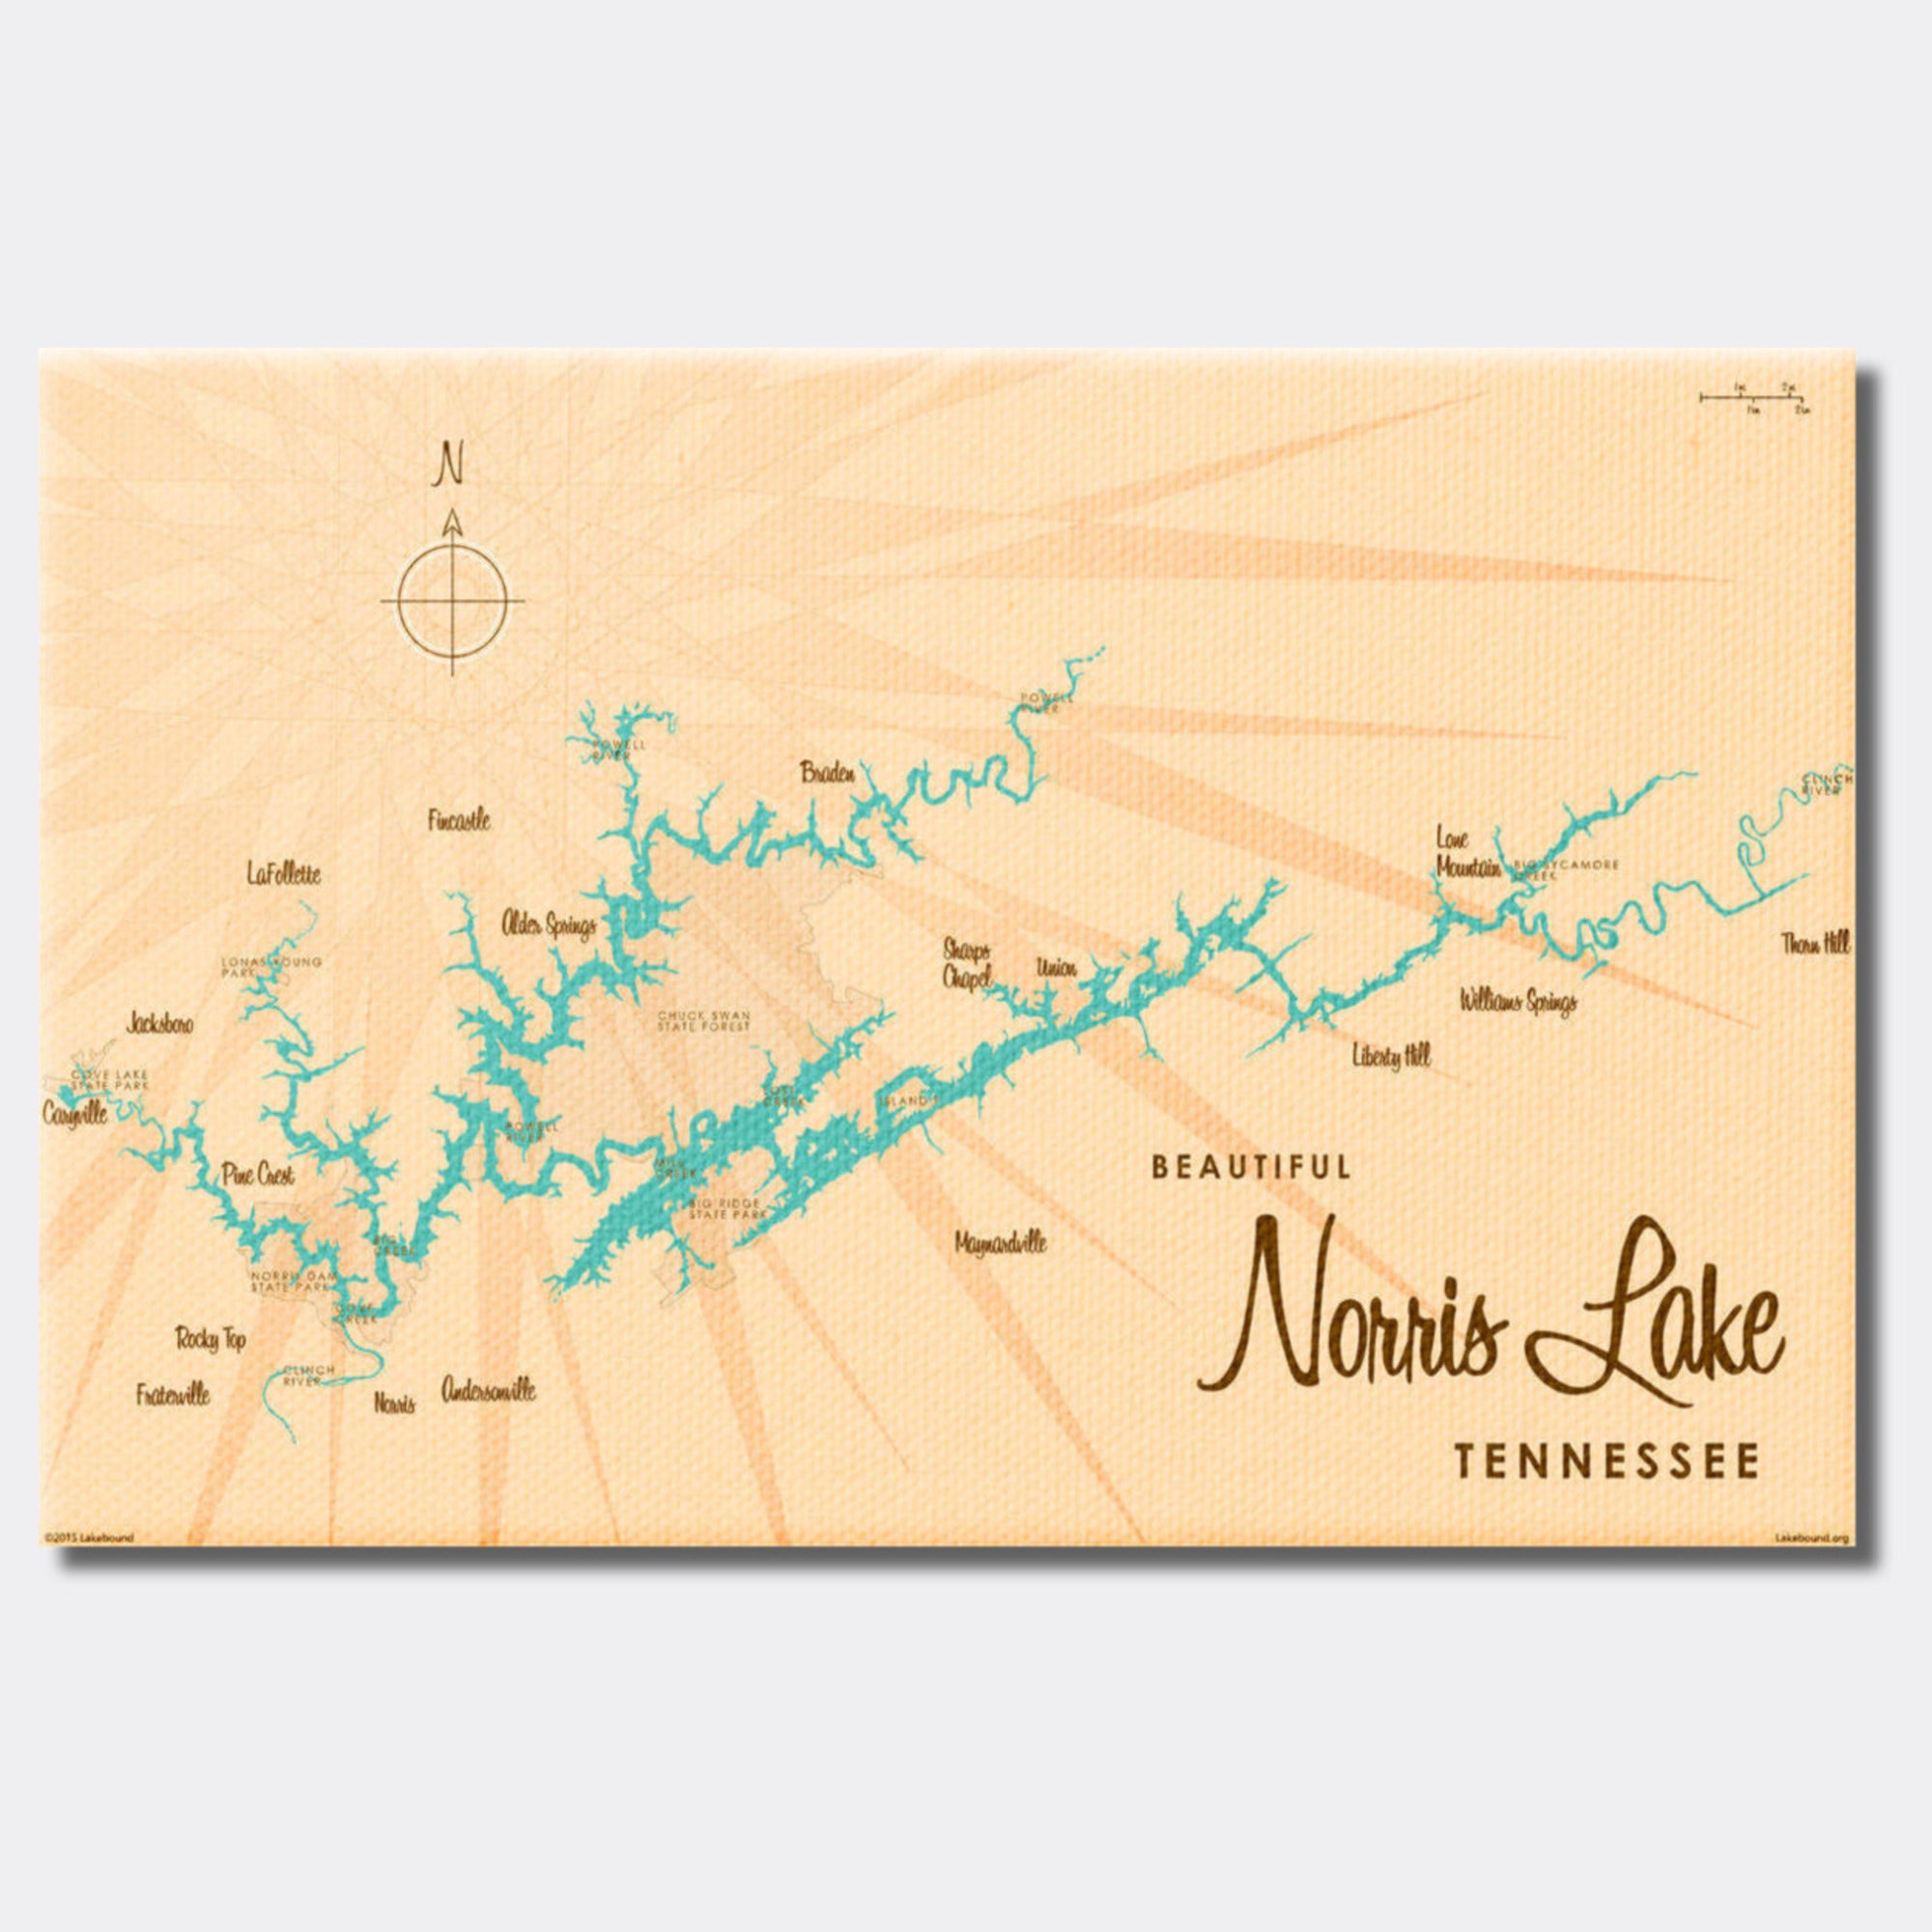 Norris Lake Tennessee, Canvas Print